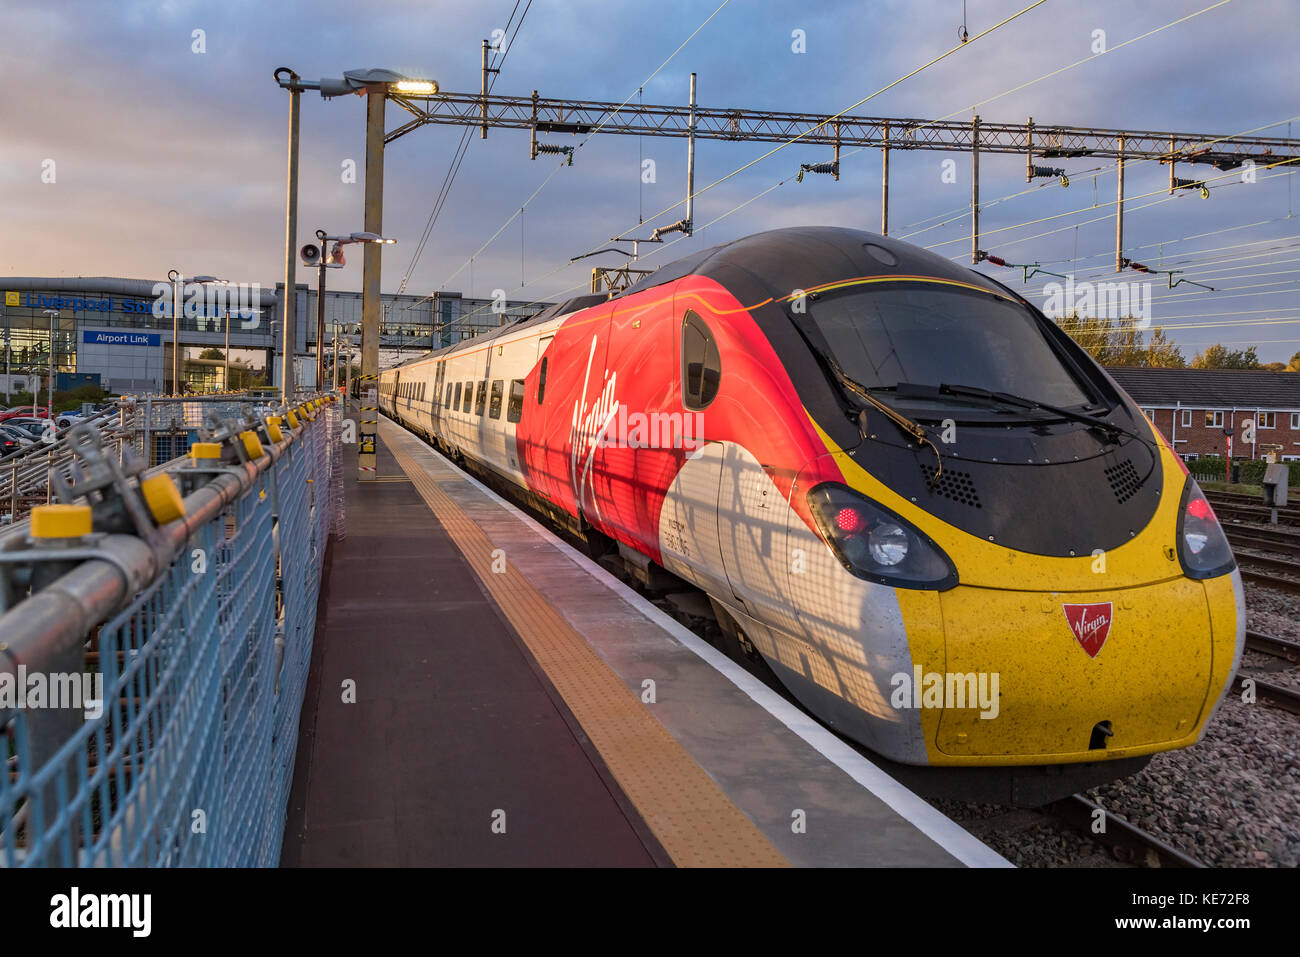 Virgin Pendolino trains at Liverpool South Parkway station. Evening light. Stock Photo